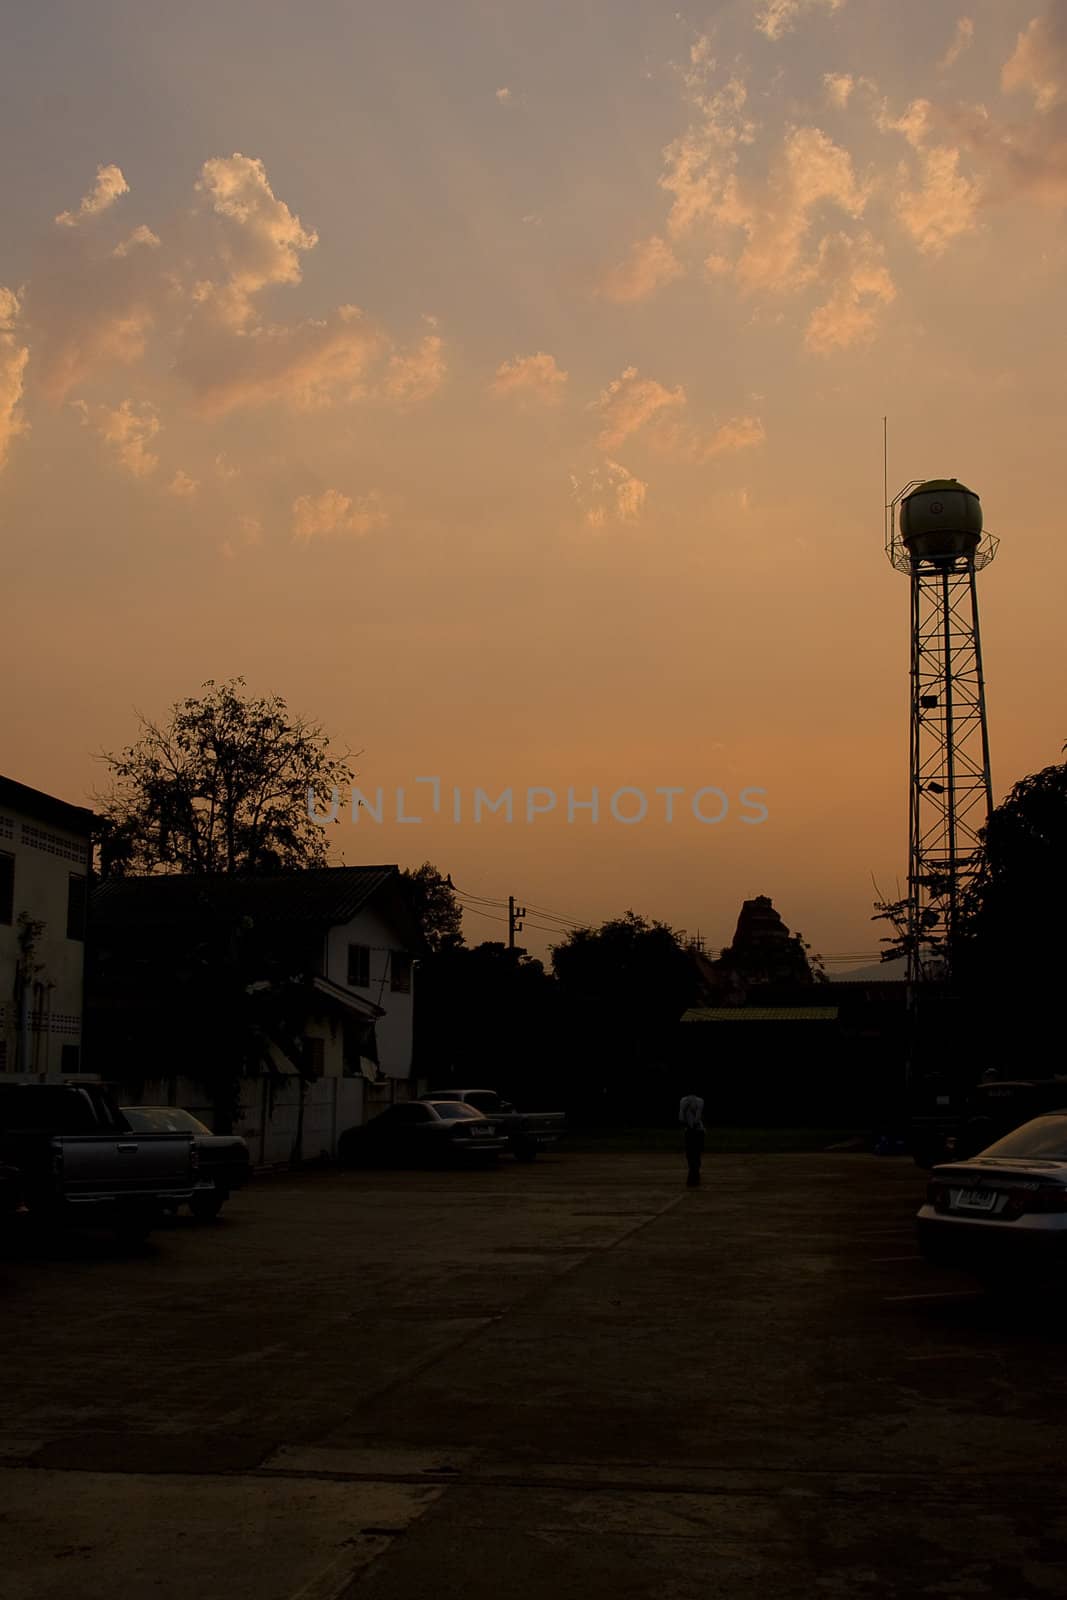 Sunset in Chiang Mai, Thailand with water tower silhouette. Nice city scene.